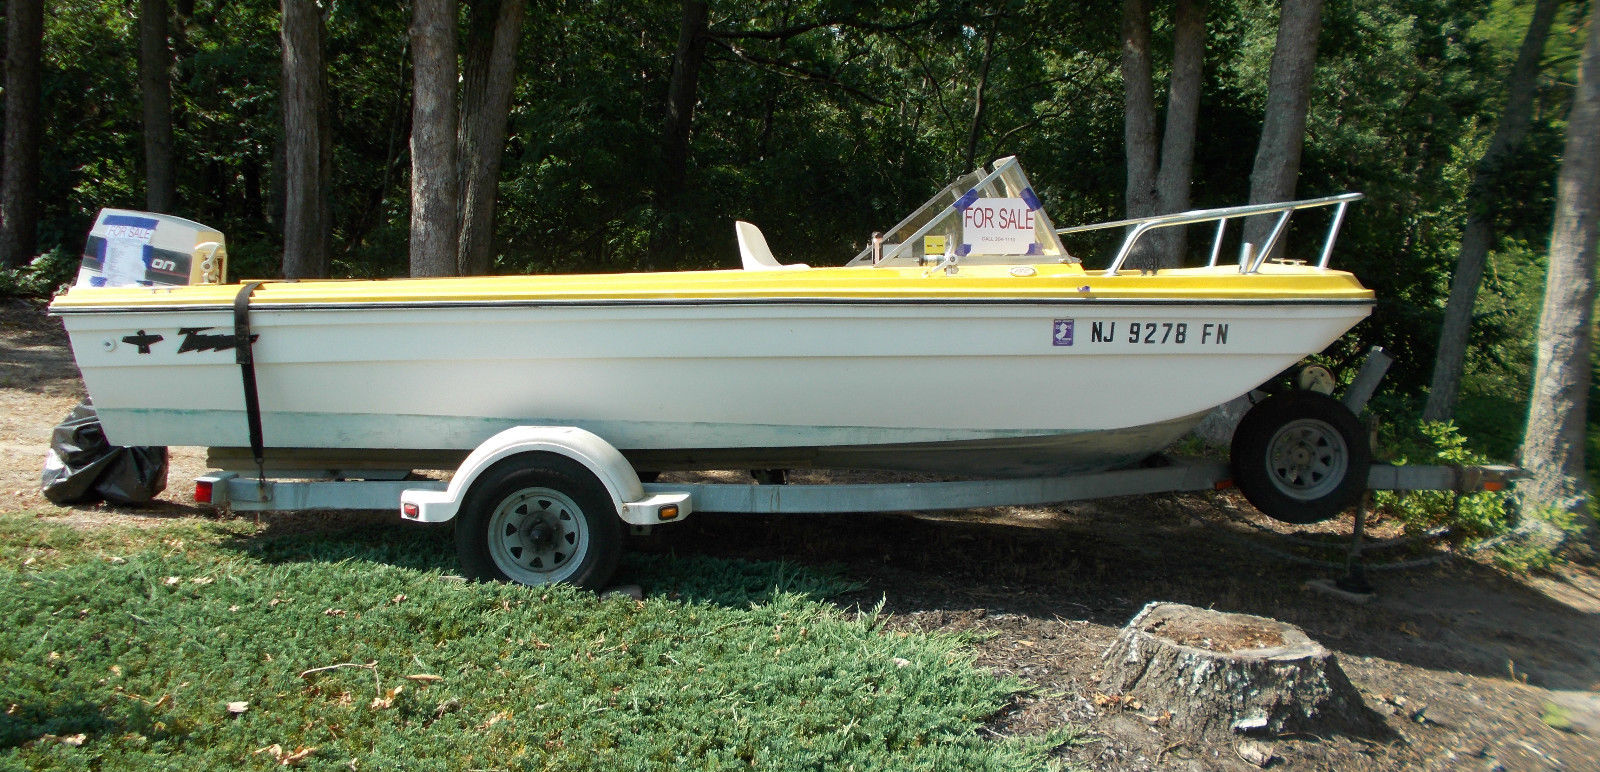 Dawson Thunderhawk 1971 for sale for $1,999 - Boats-from ...